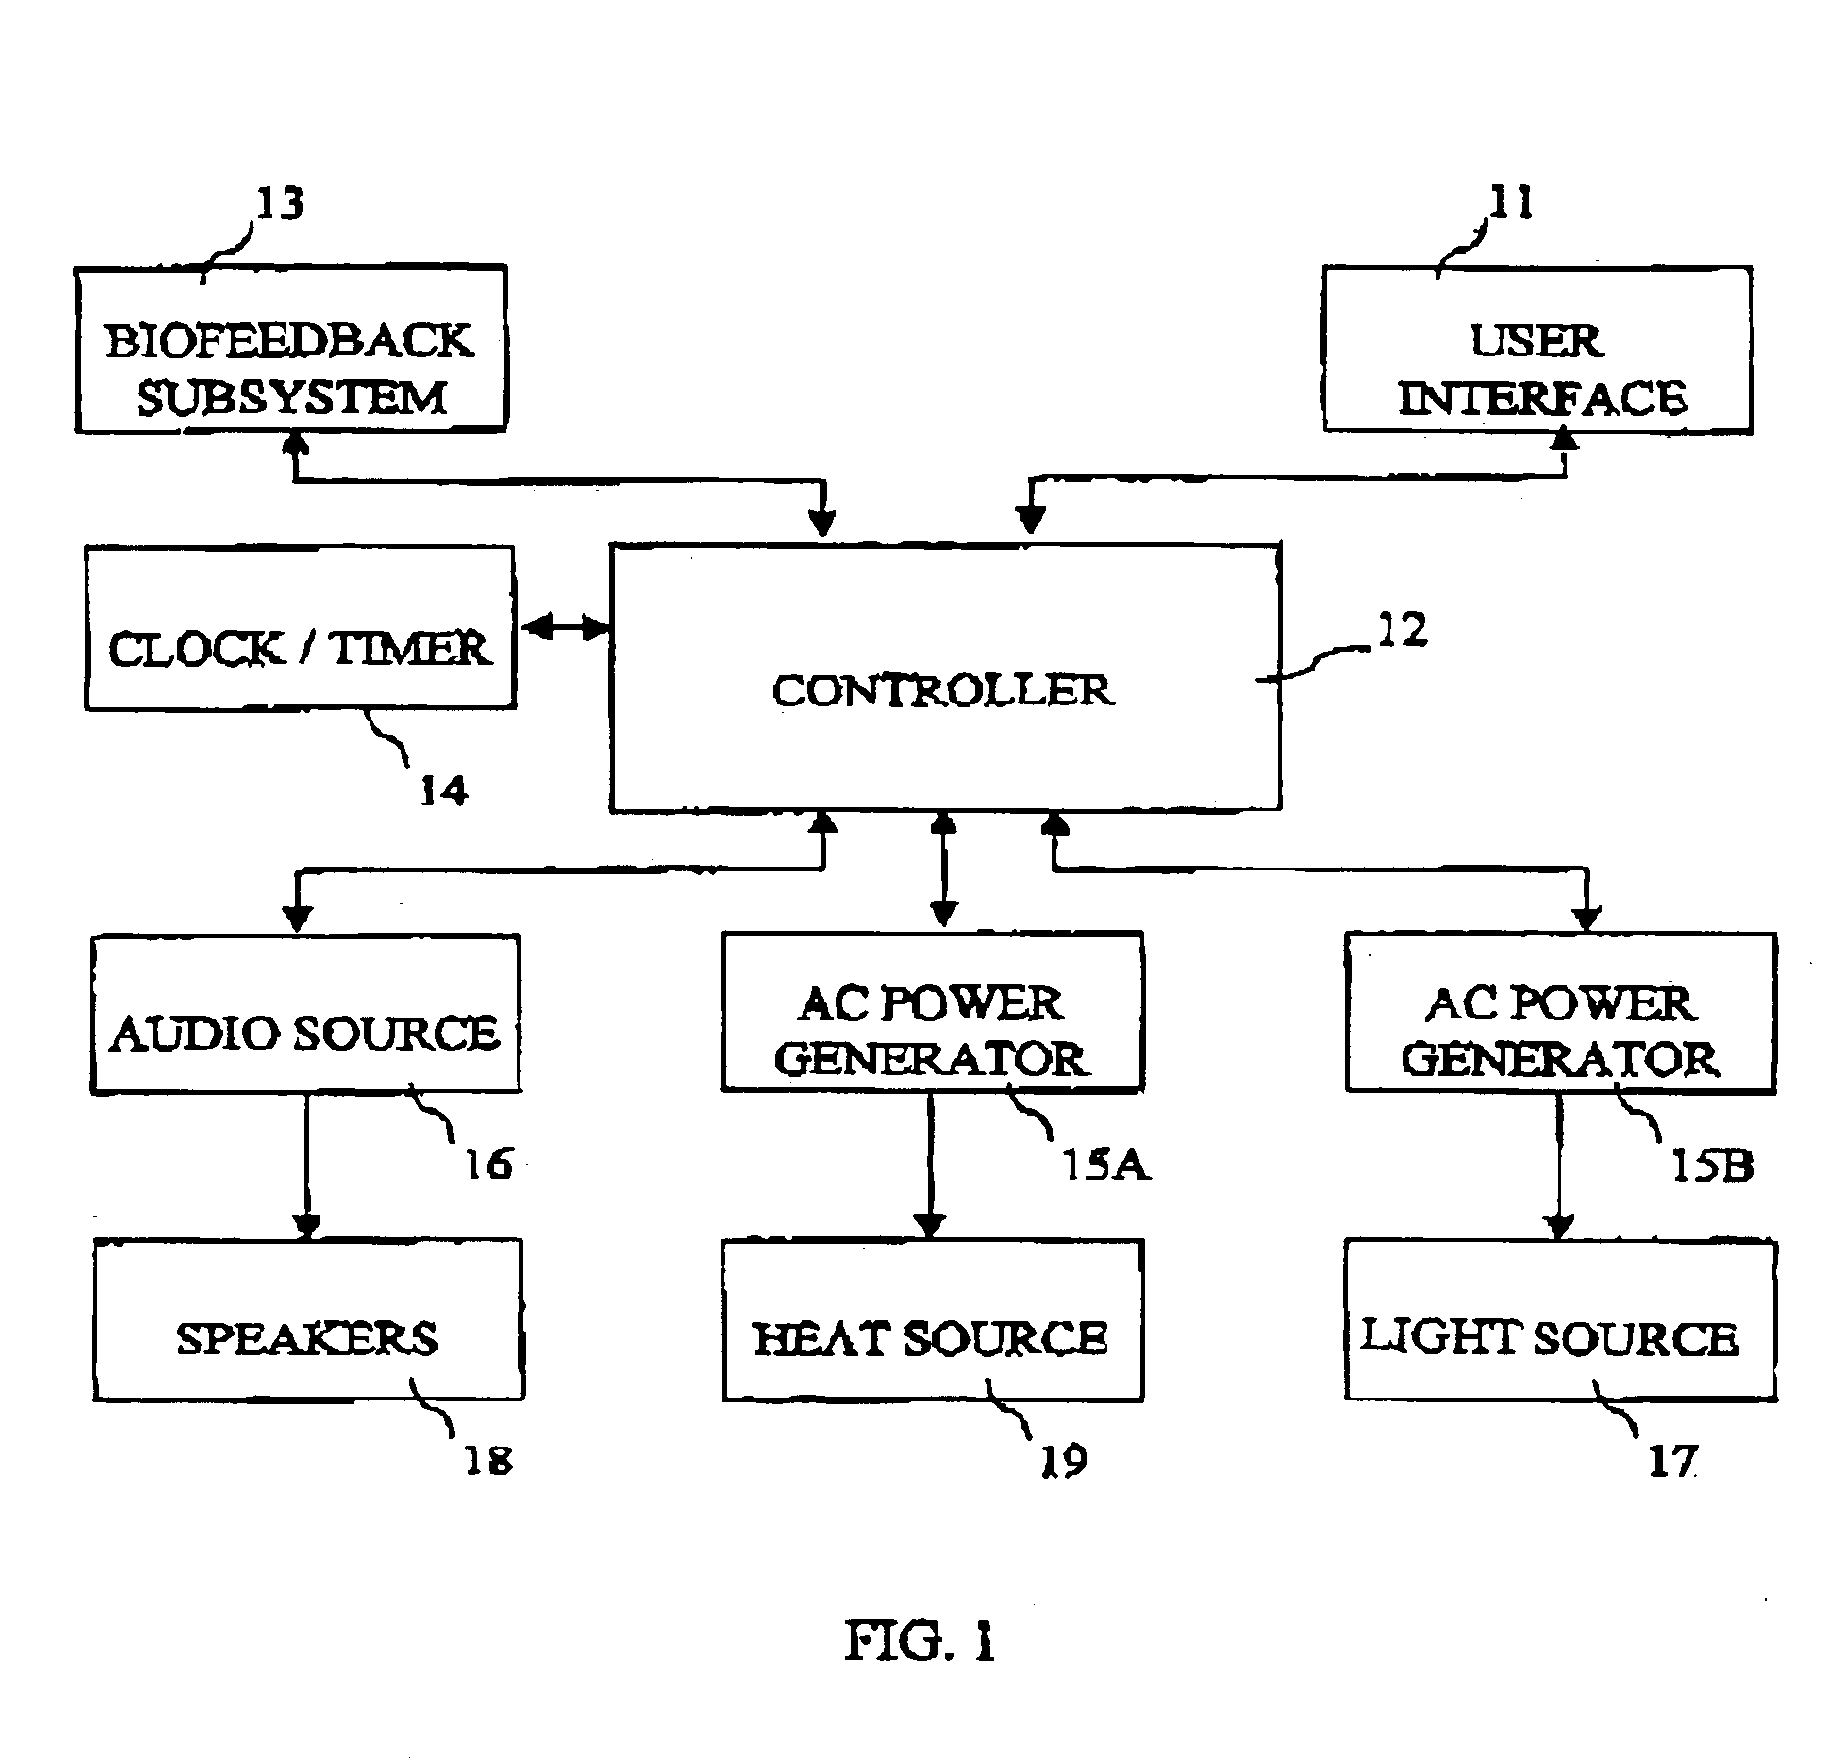 Method and apparatus for a waking control system